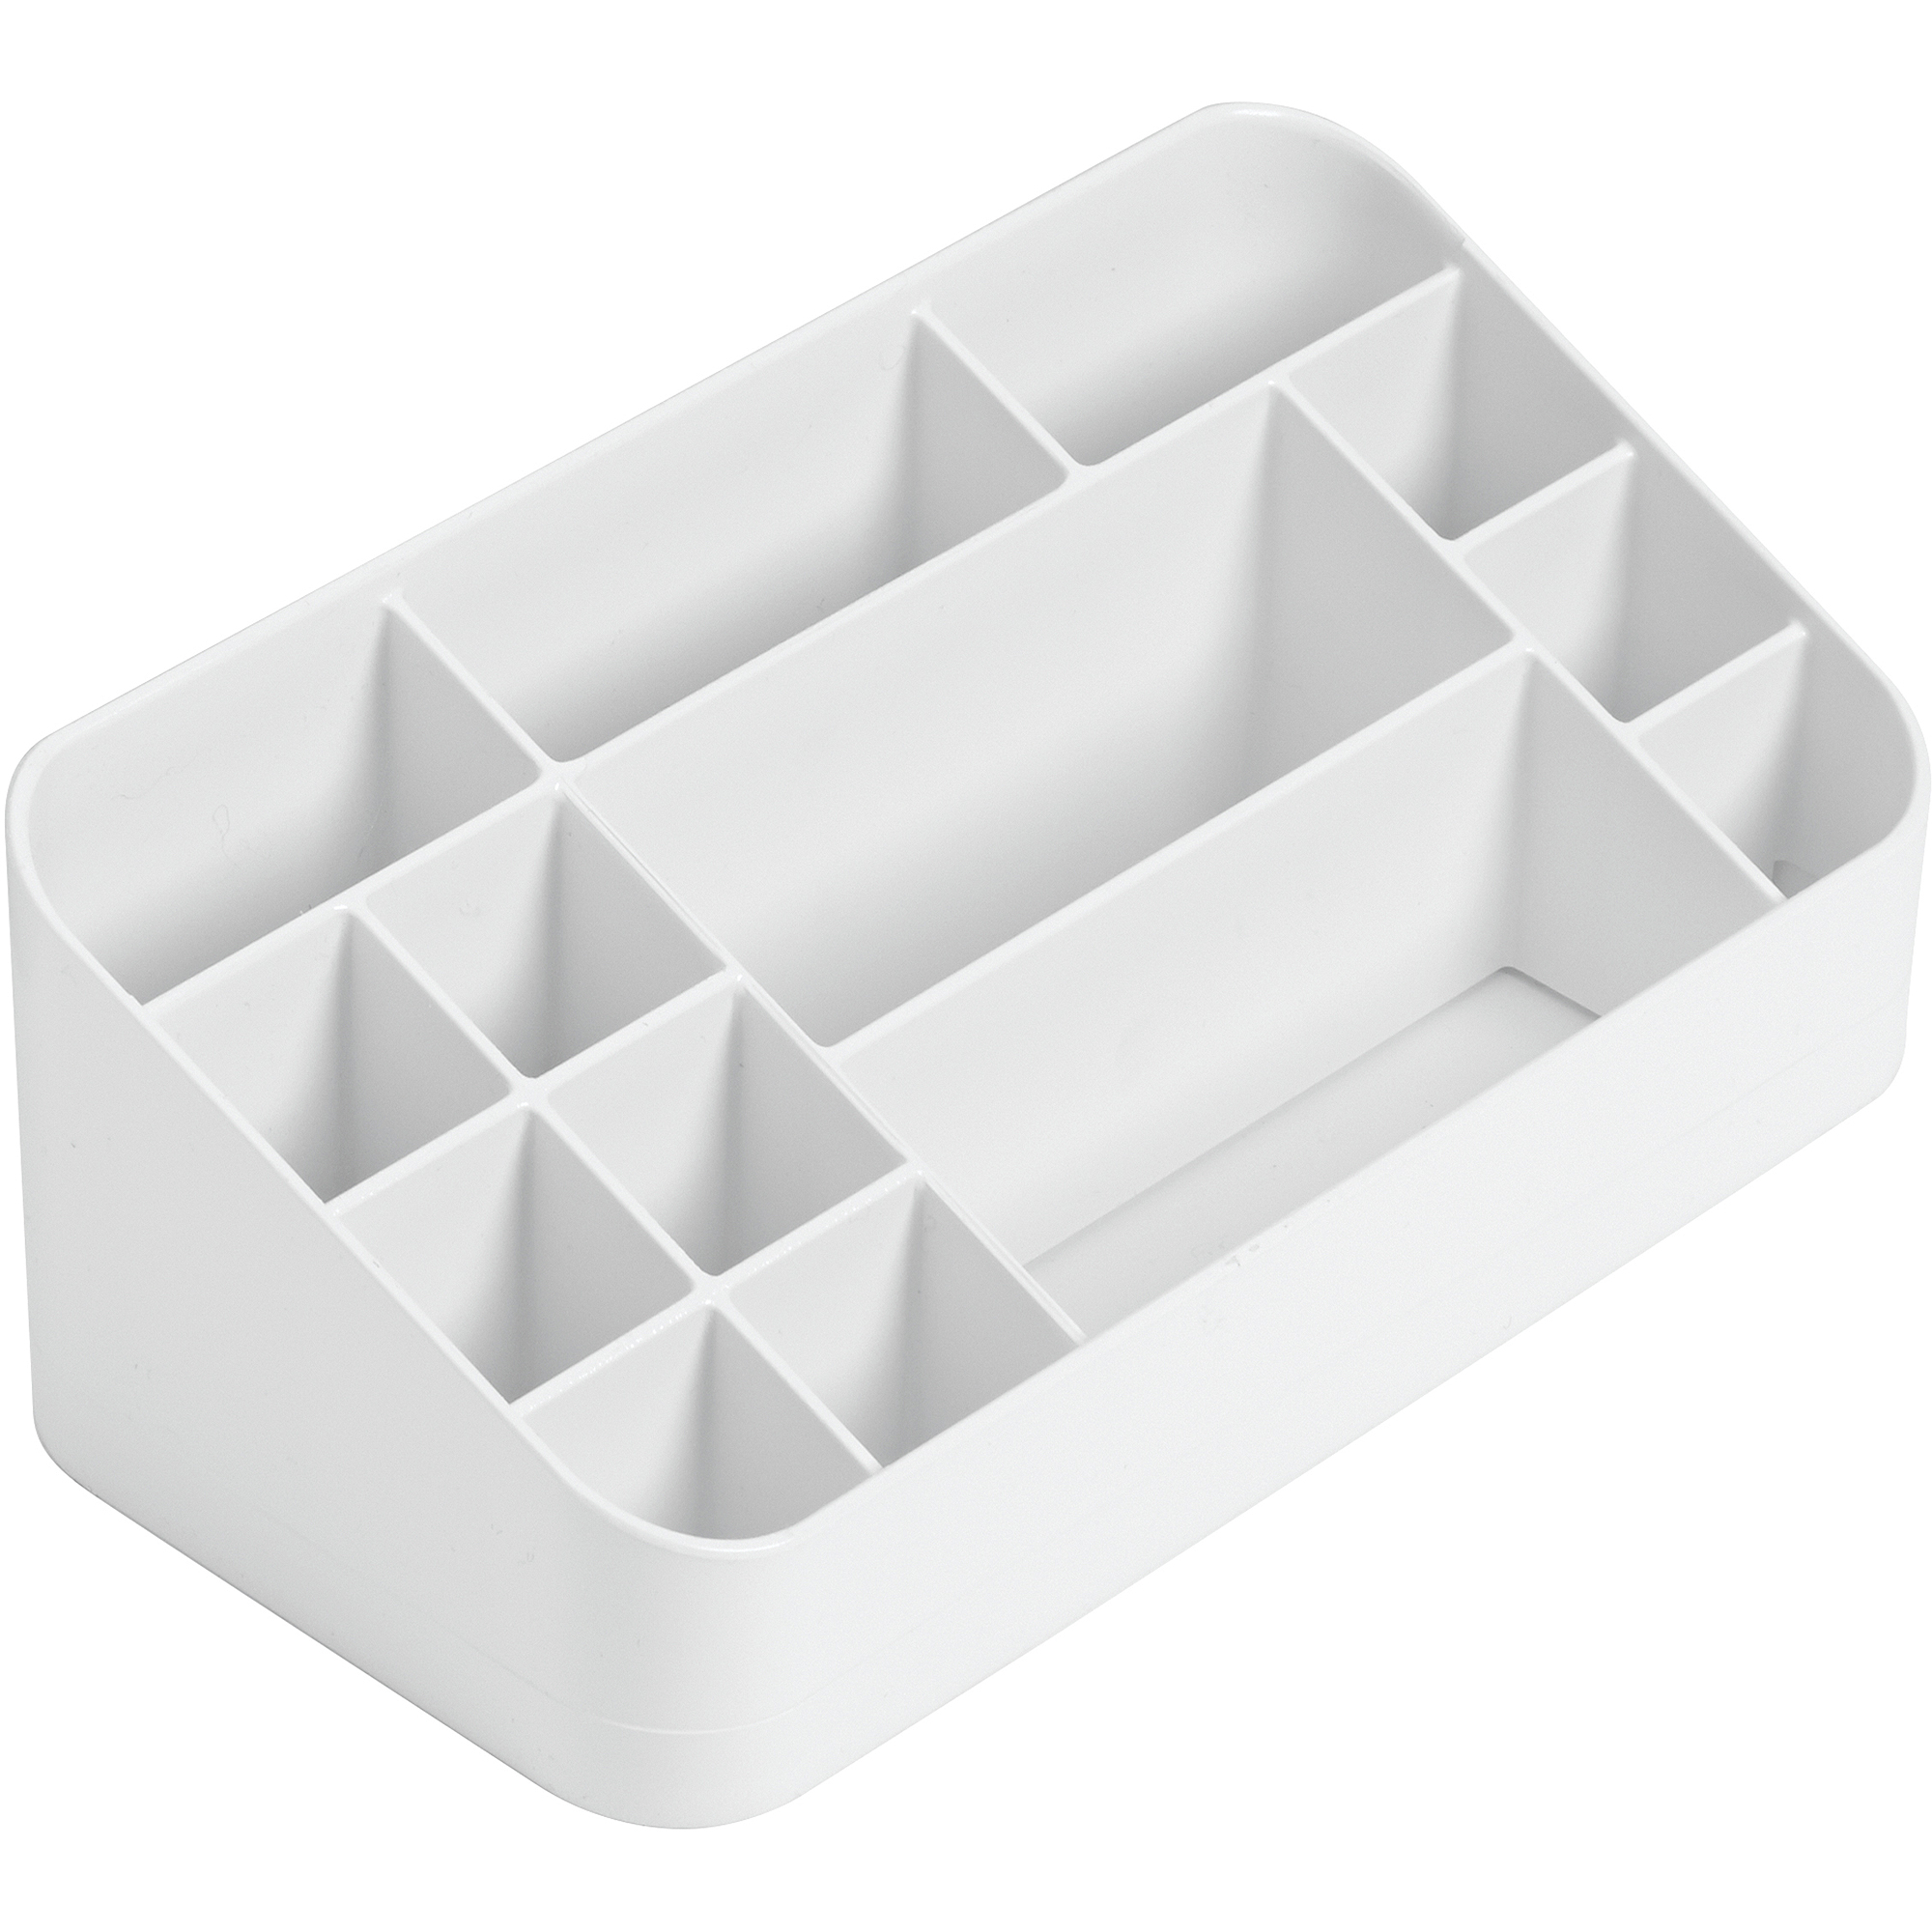 iDesign Clarity Cosmetic Organizer for Vanity Cabinet to Hold Makeup, Beauty Products, Lip Sticks, White - image 2 of 6